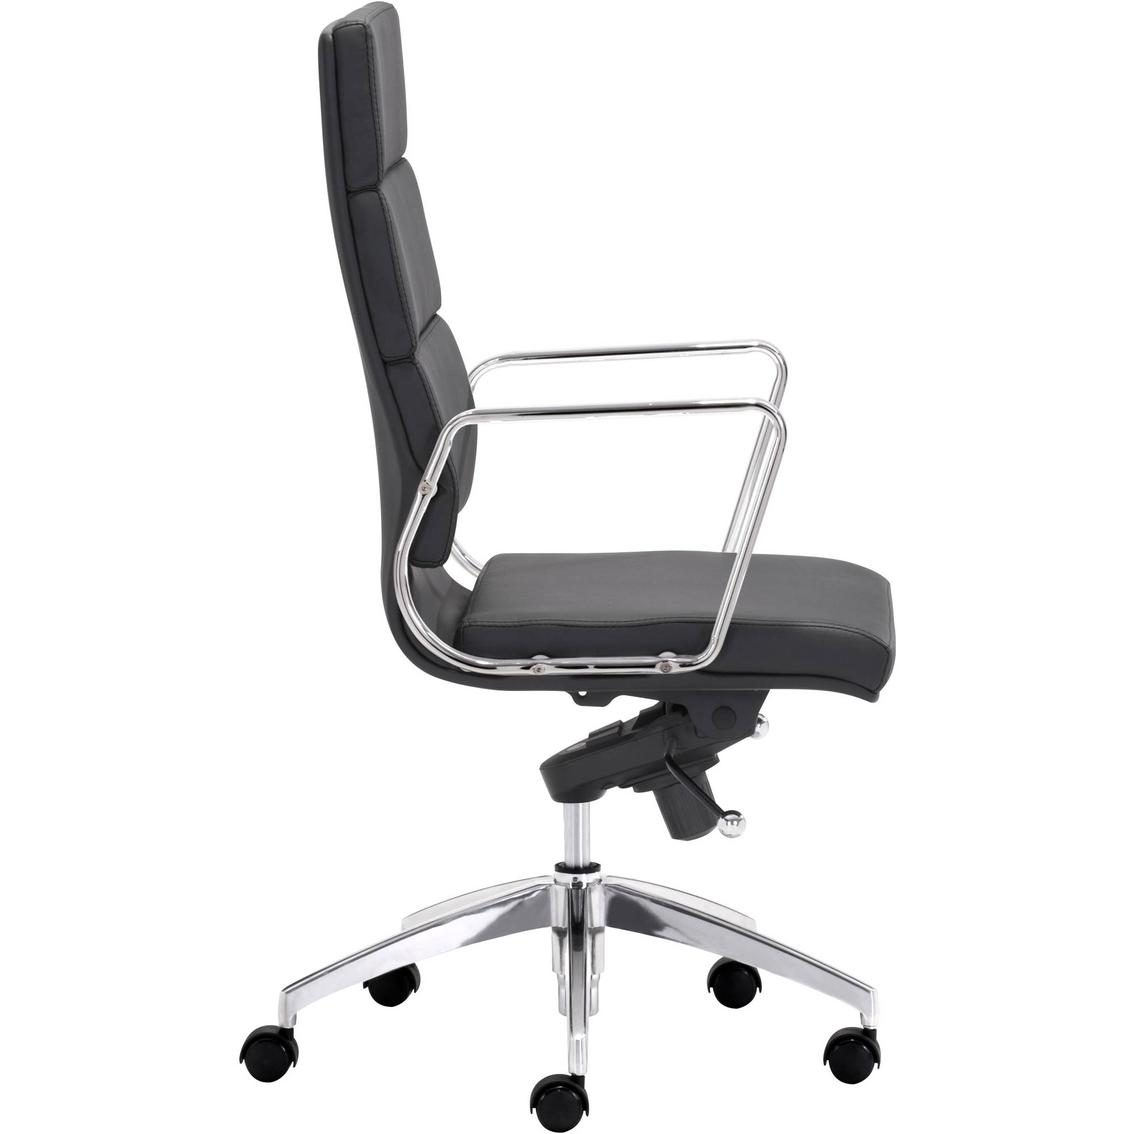 Zuo Modern Engineer High Back Office Chair Black - Image 4 of 4